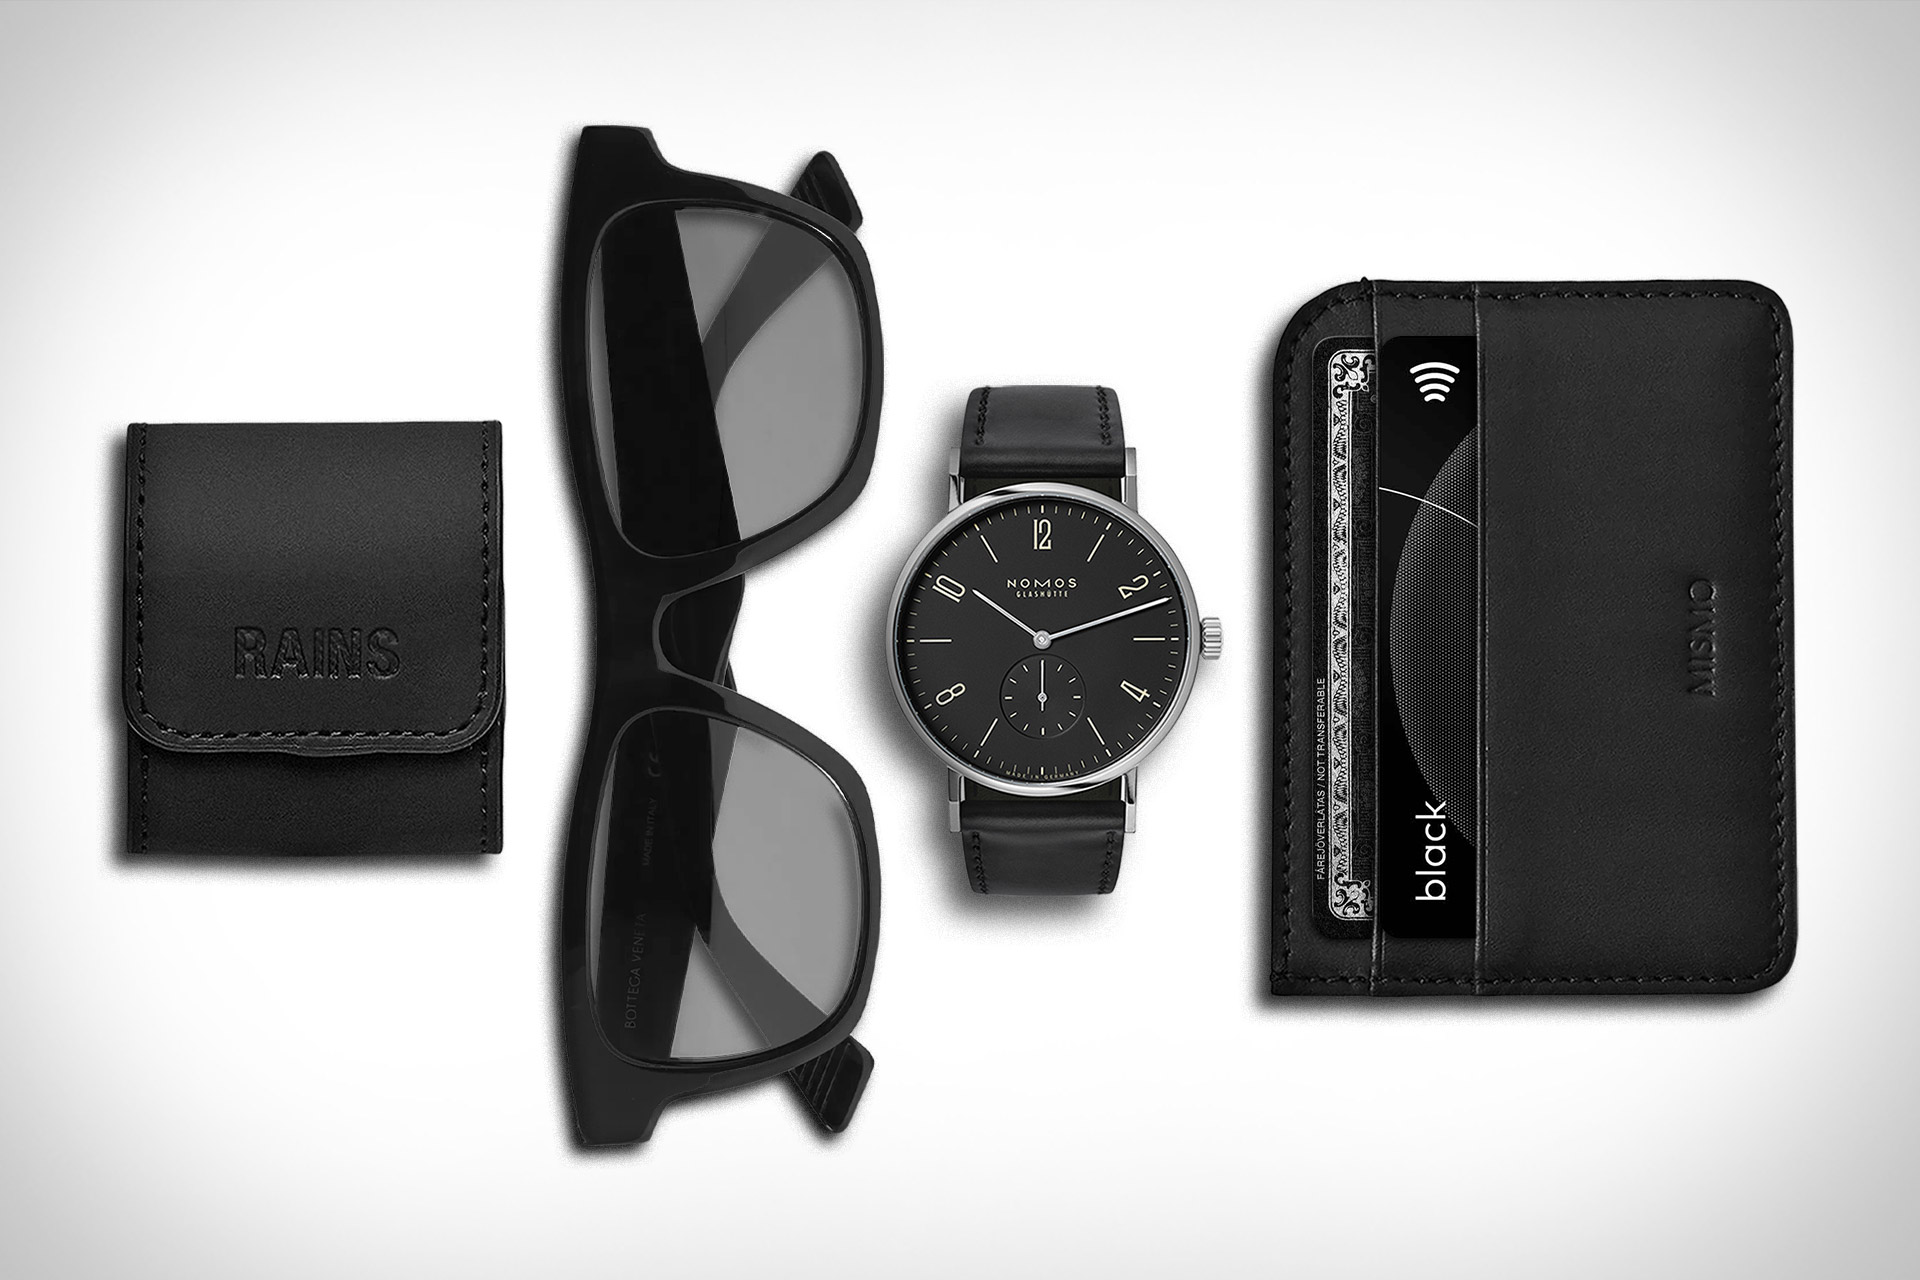 Everyday Carry: Shadow | Uncrate, #Everyday #Carry #Shadow #Uncrate